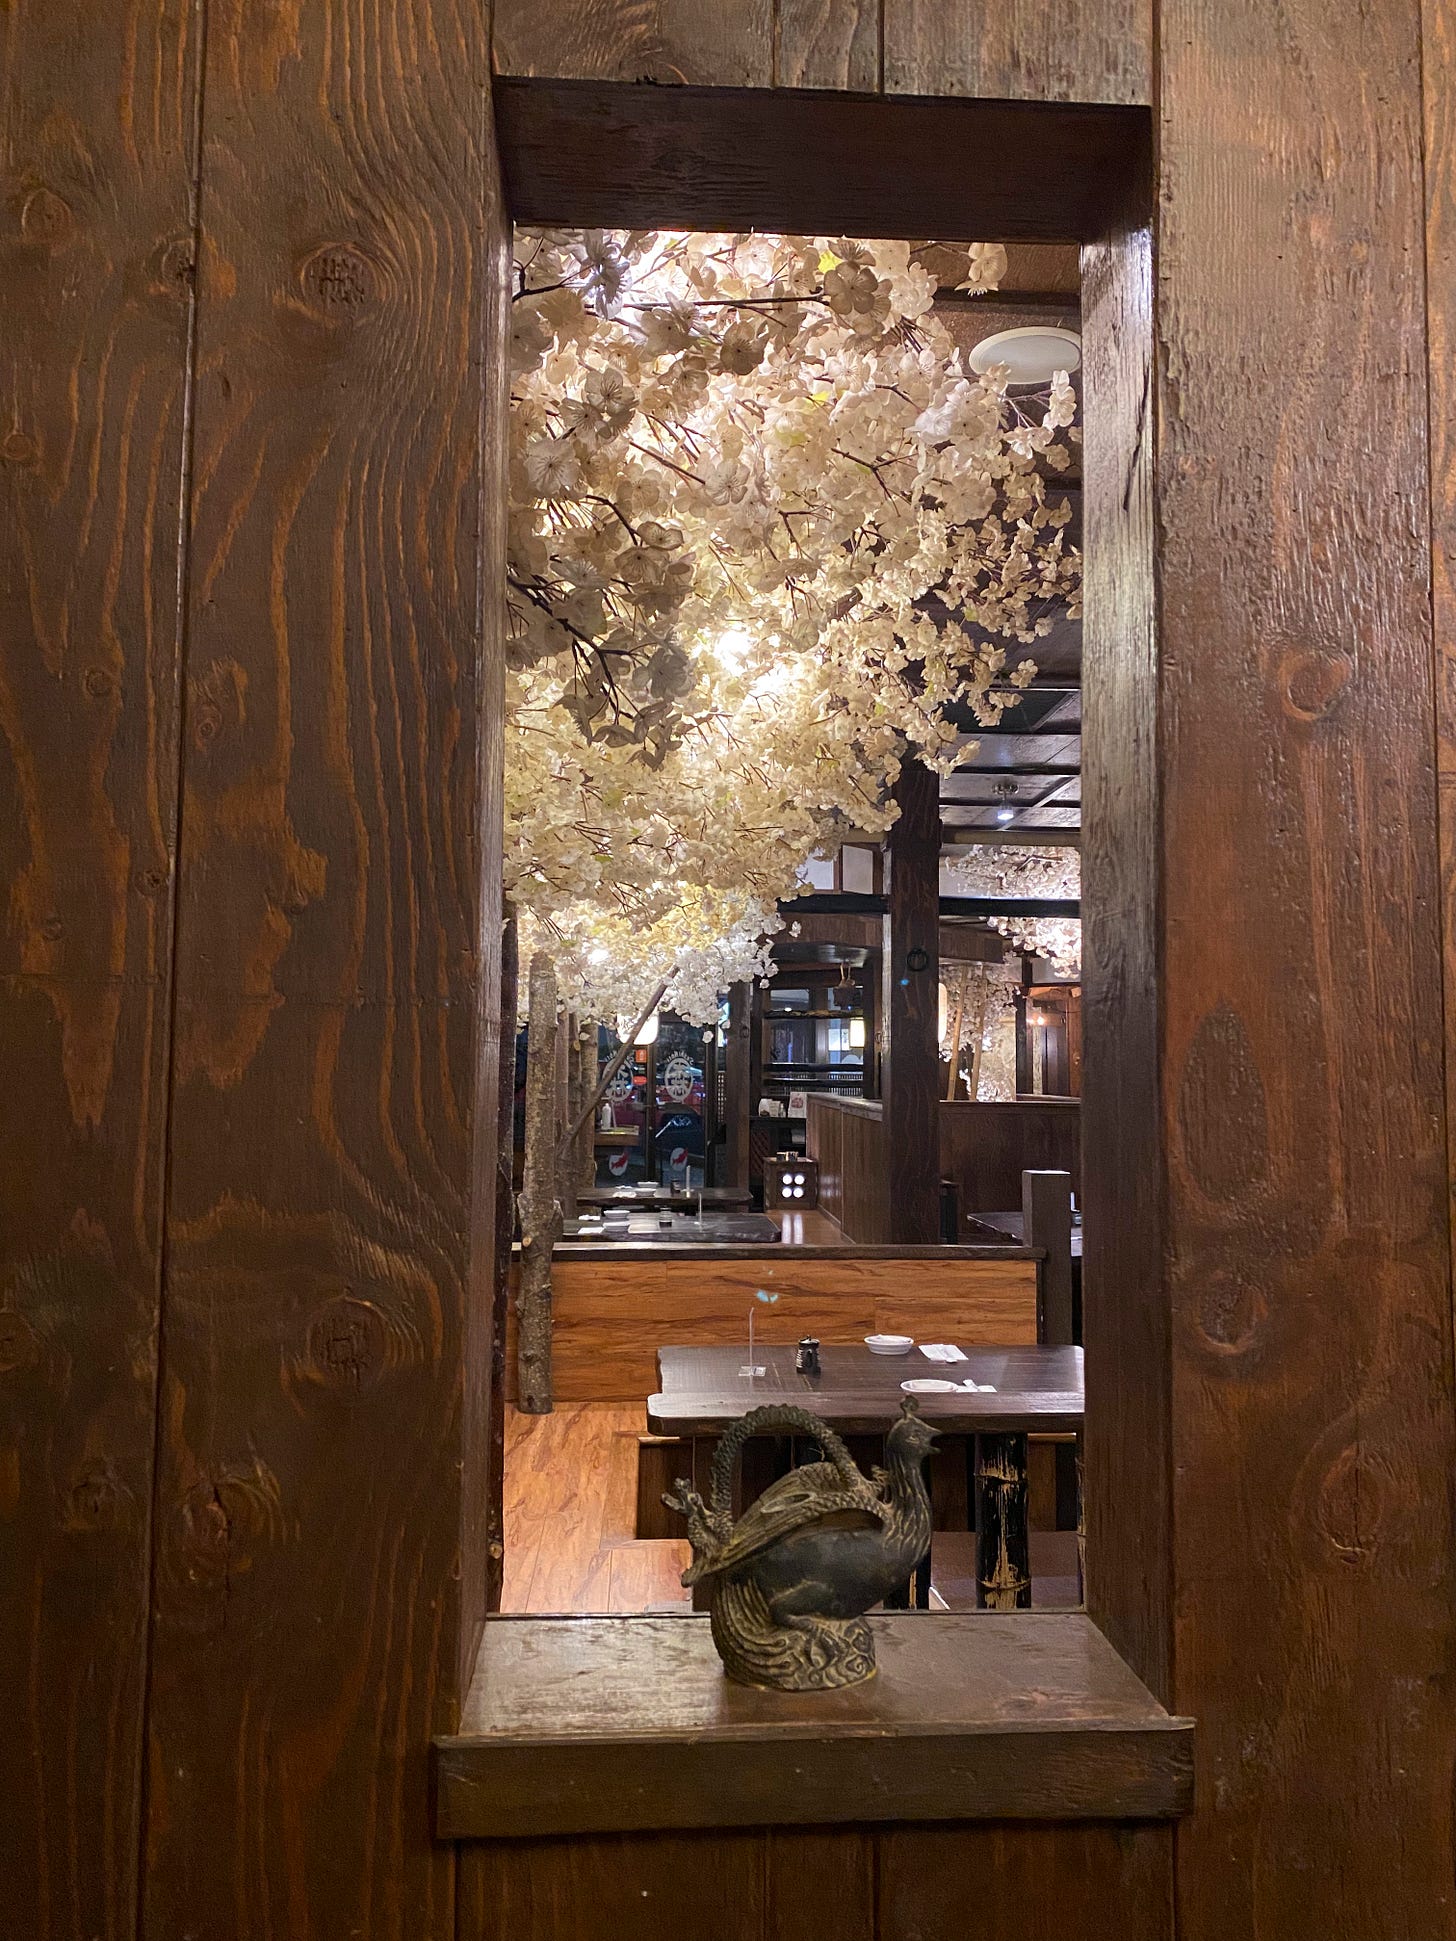 A wooden interior wall with a narrow, rectangular window showing more of the restaurant. Fake cherry blossoms surround the ceiling, lit from within. At the bottom of the windowsill is a carving of a bird.